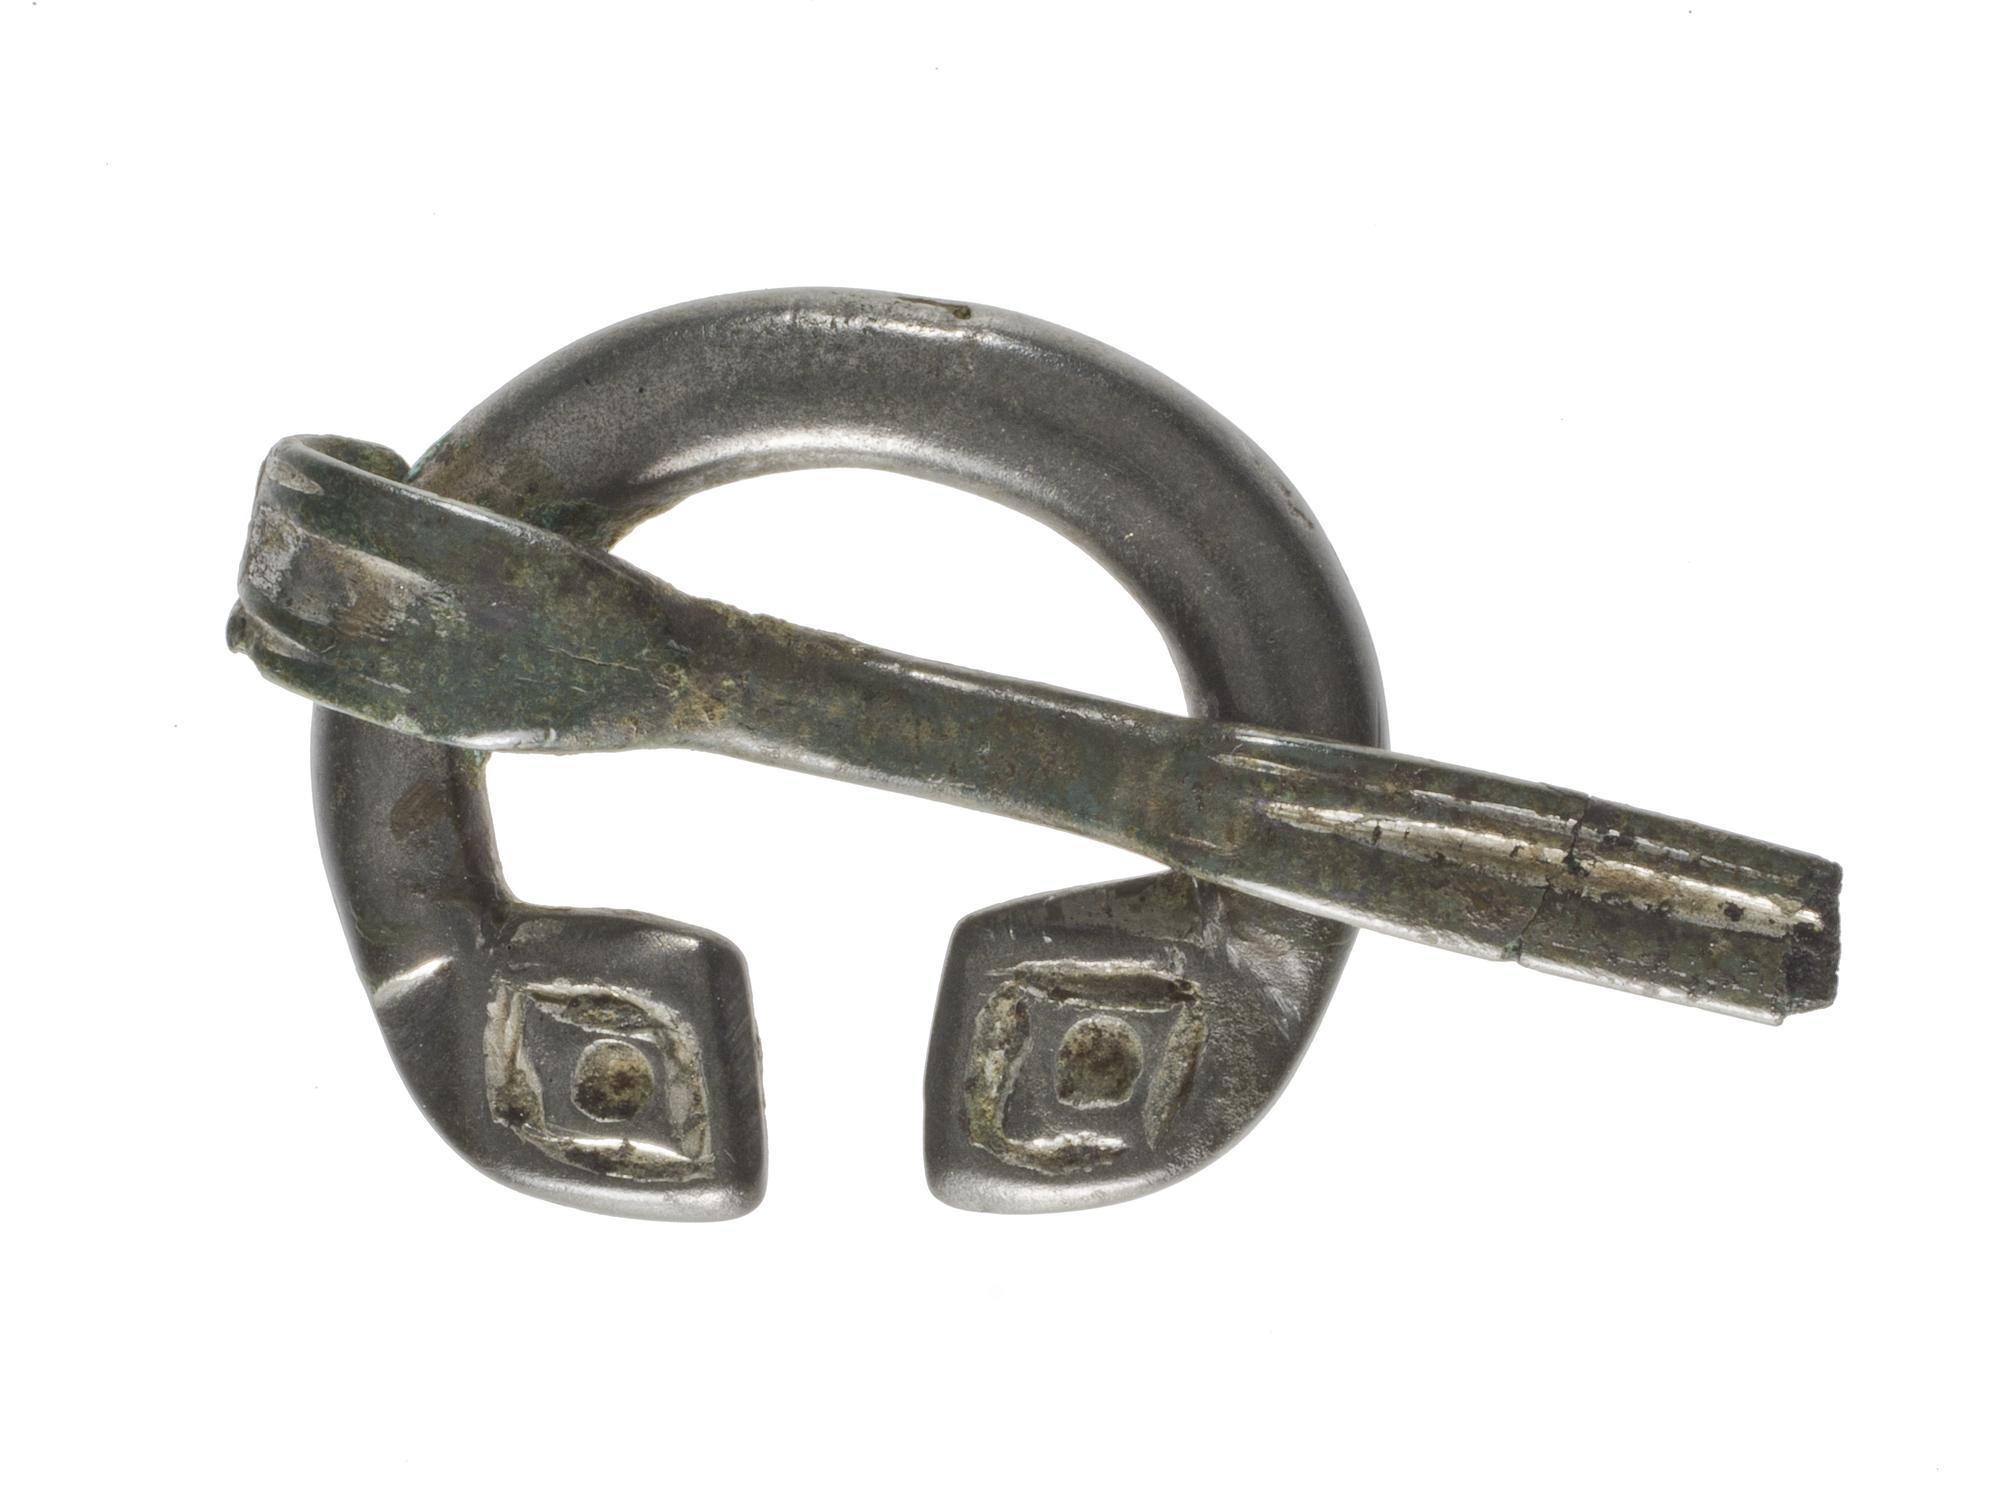 Image of Tinned bronze penannular brooch, from Castlehill, Ayrshire, 600 - 900 AD © National Museums Scotland